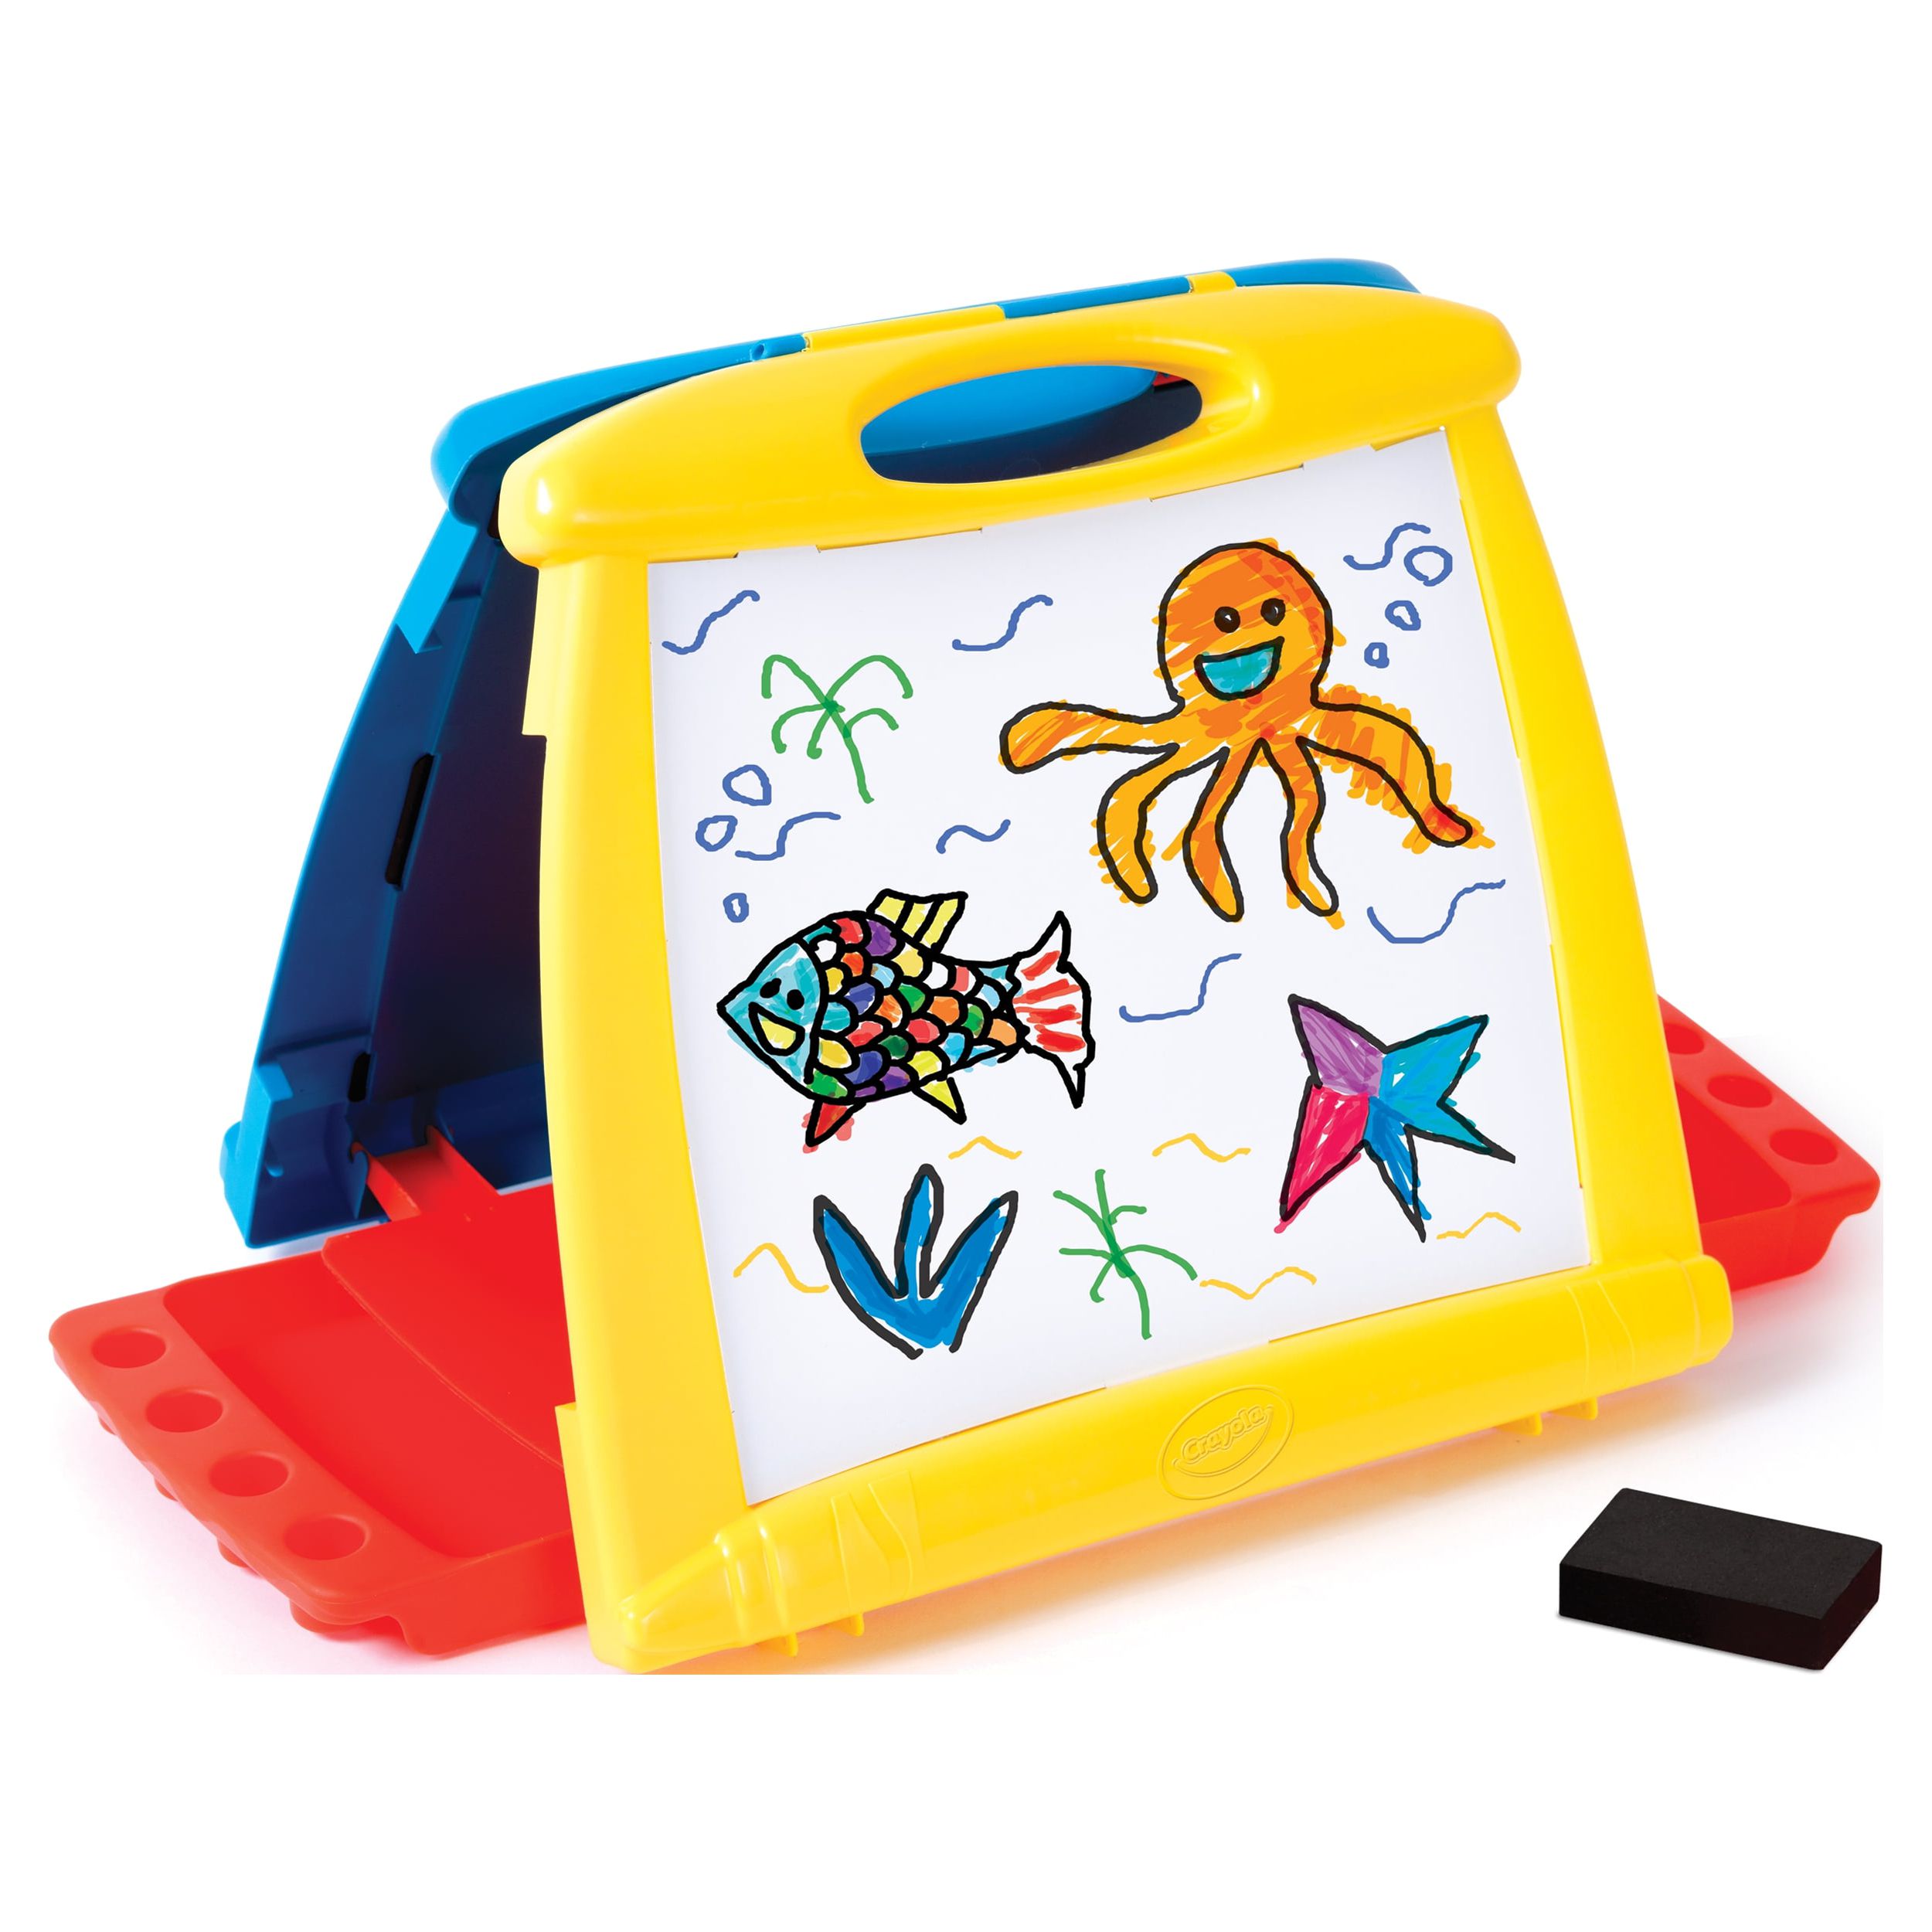 Crayola Art-to-Go 12.3"  Plastic Table Easel with Storage Trays - image 1 of 8